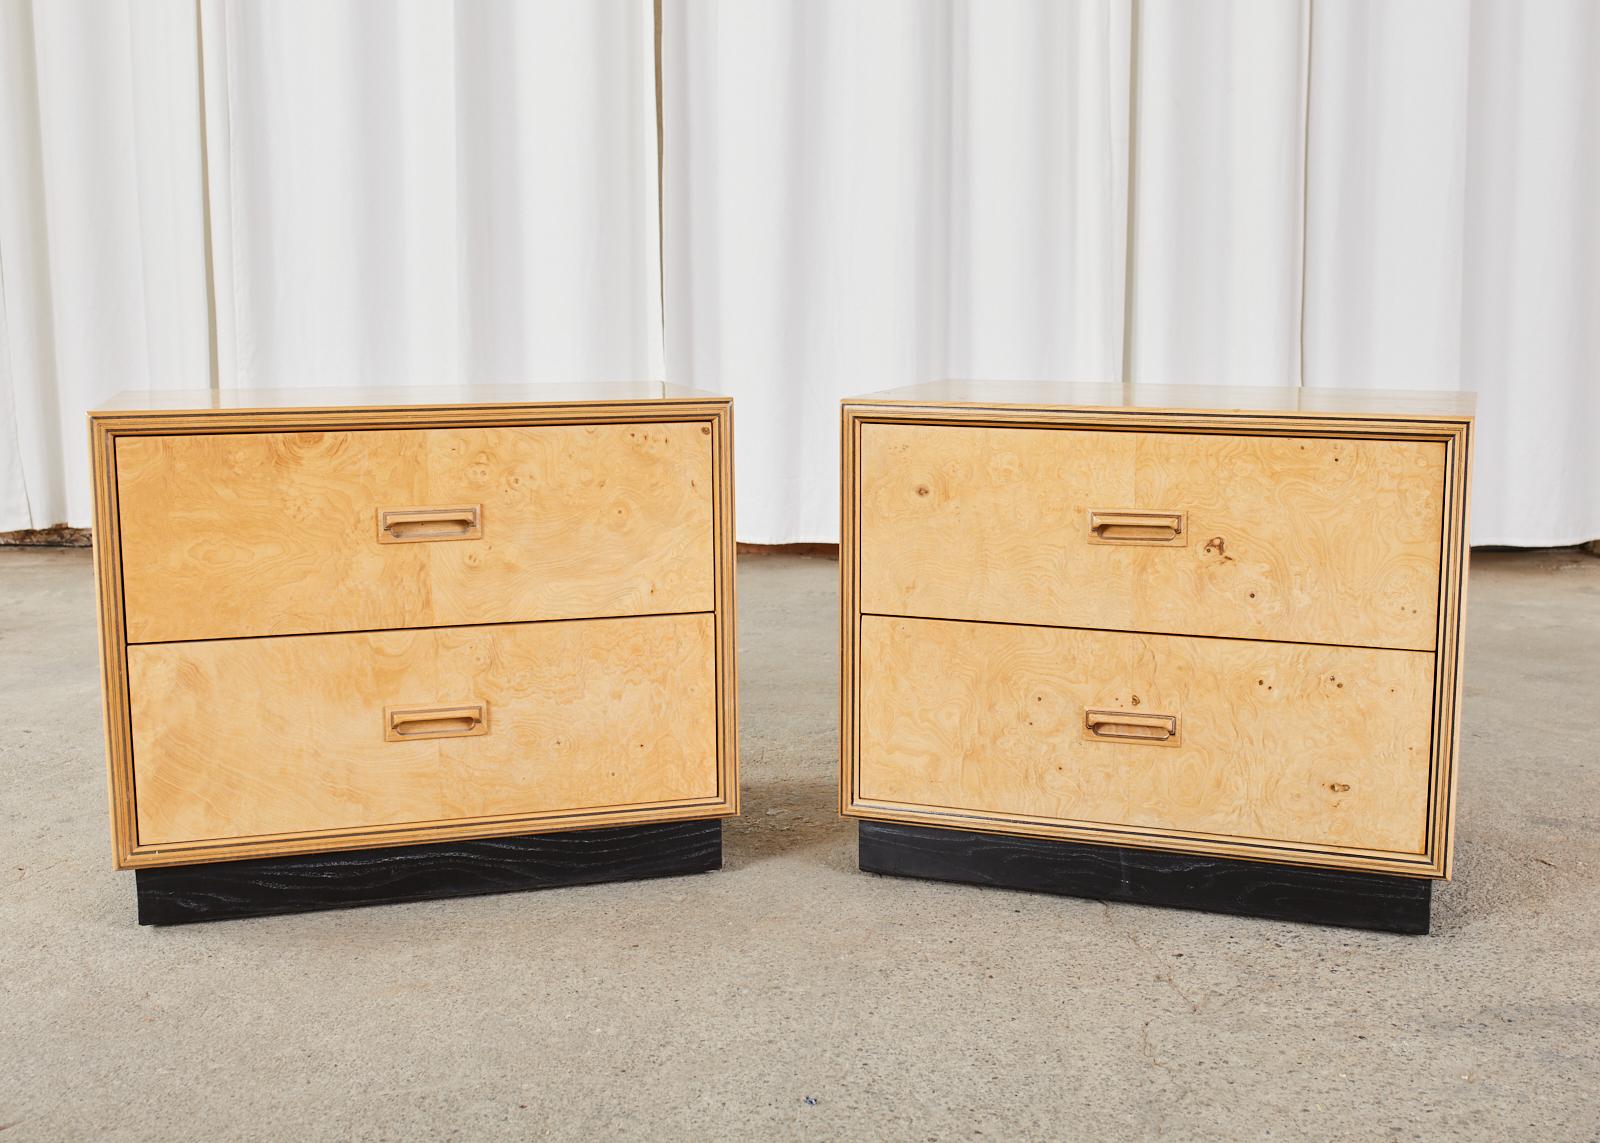 Stunning pair of low bachelors chests or nightstands made by Henredon's Scene Two collection. The chests feature a burl olive wood on the front of the drawers and an ash hardwood case finished in blonde. The nightstands are mounted to an ebonized